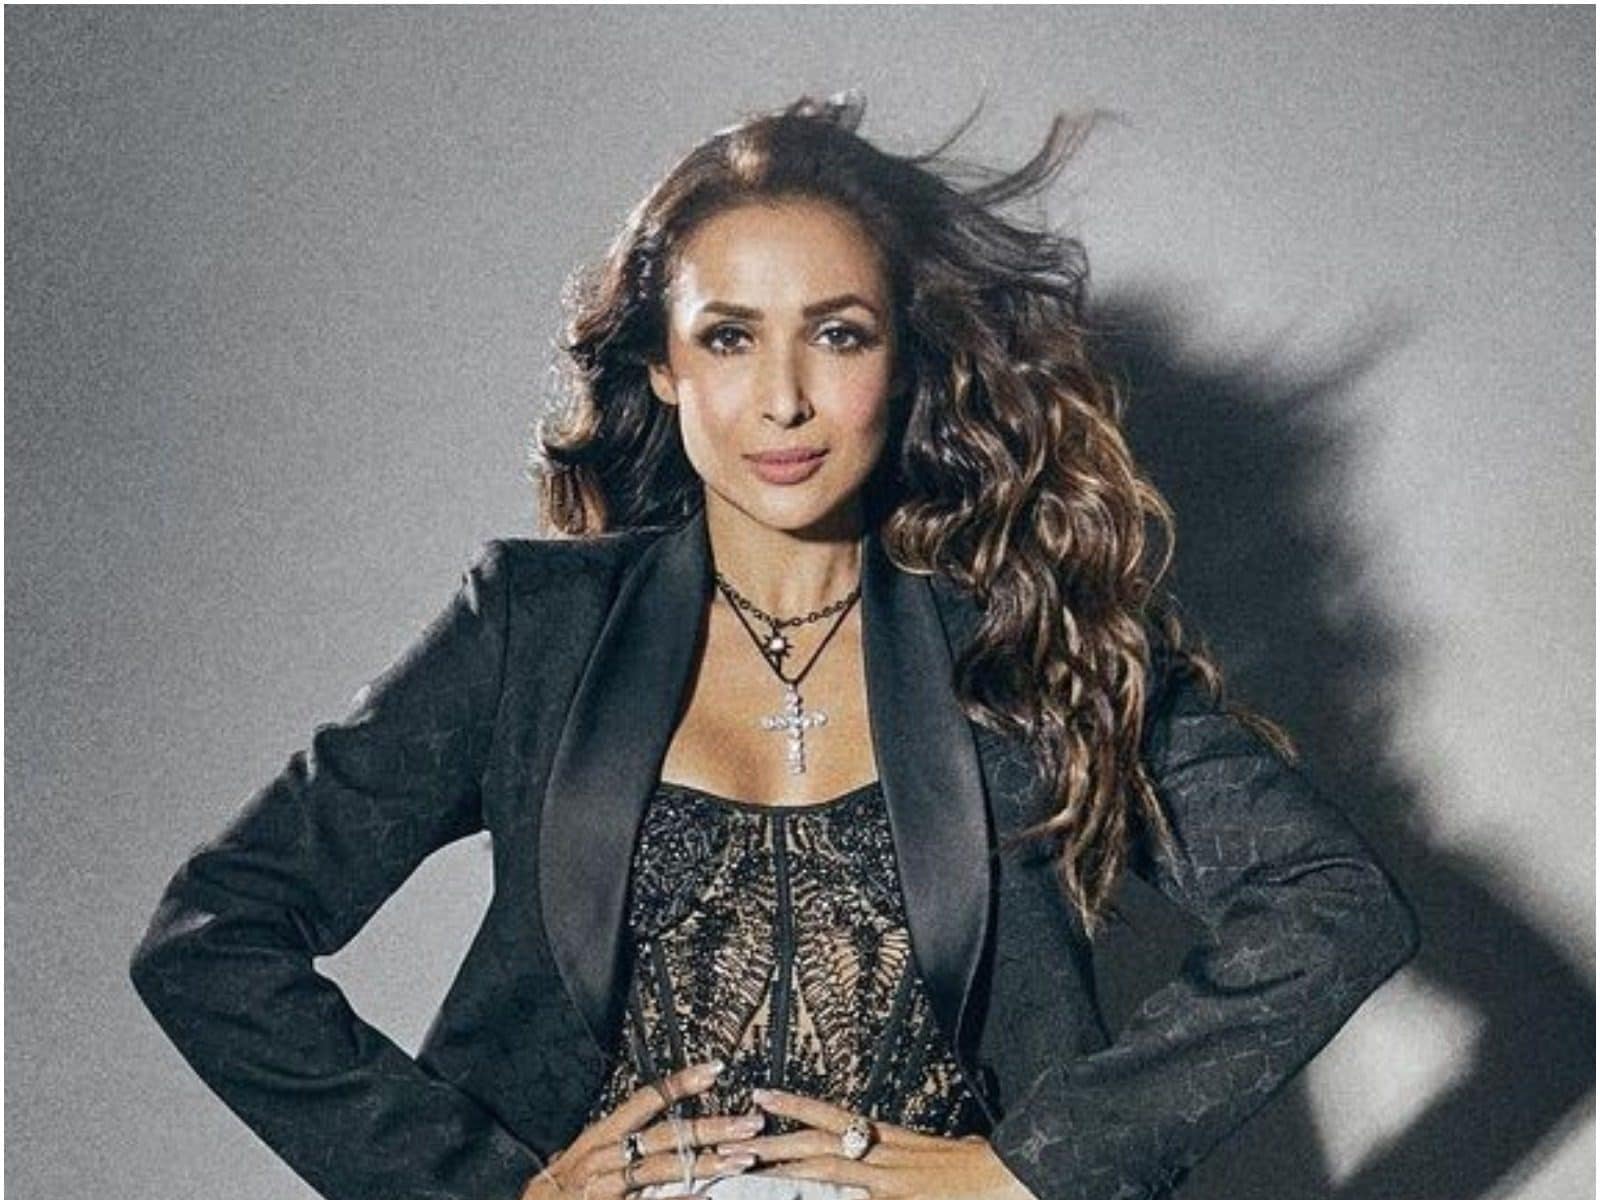 Malaika Arora says it’s considered as ‘sacrilege’ when a woman dates a younger man